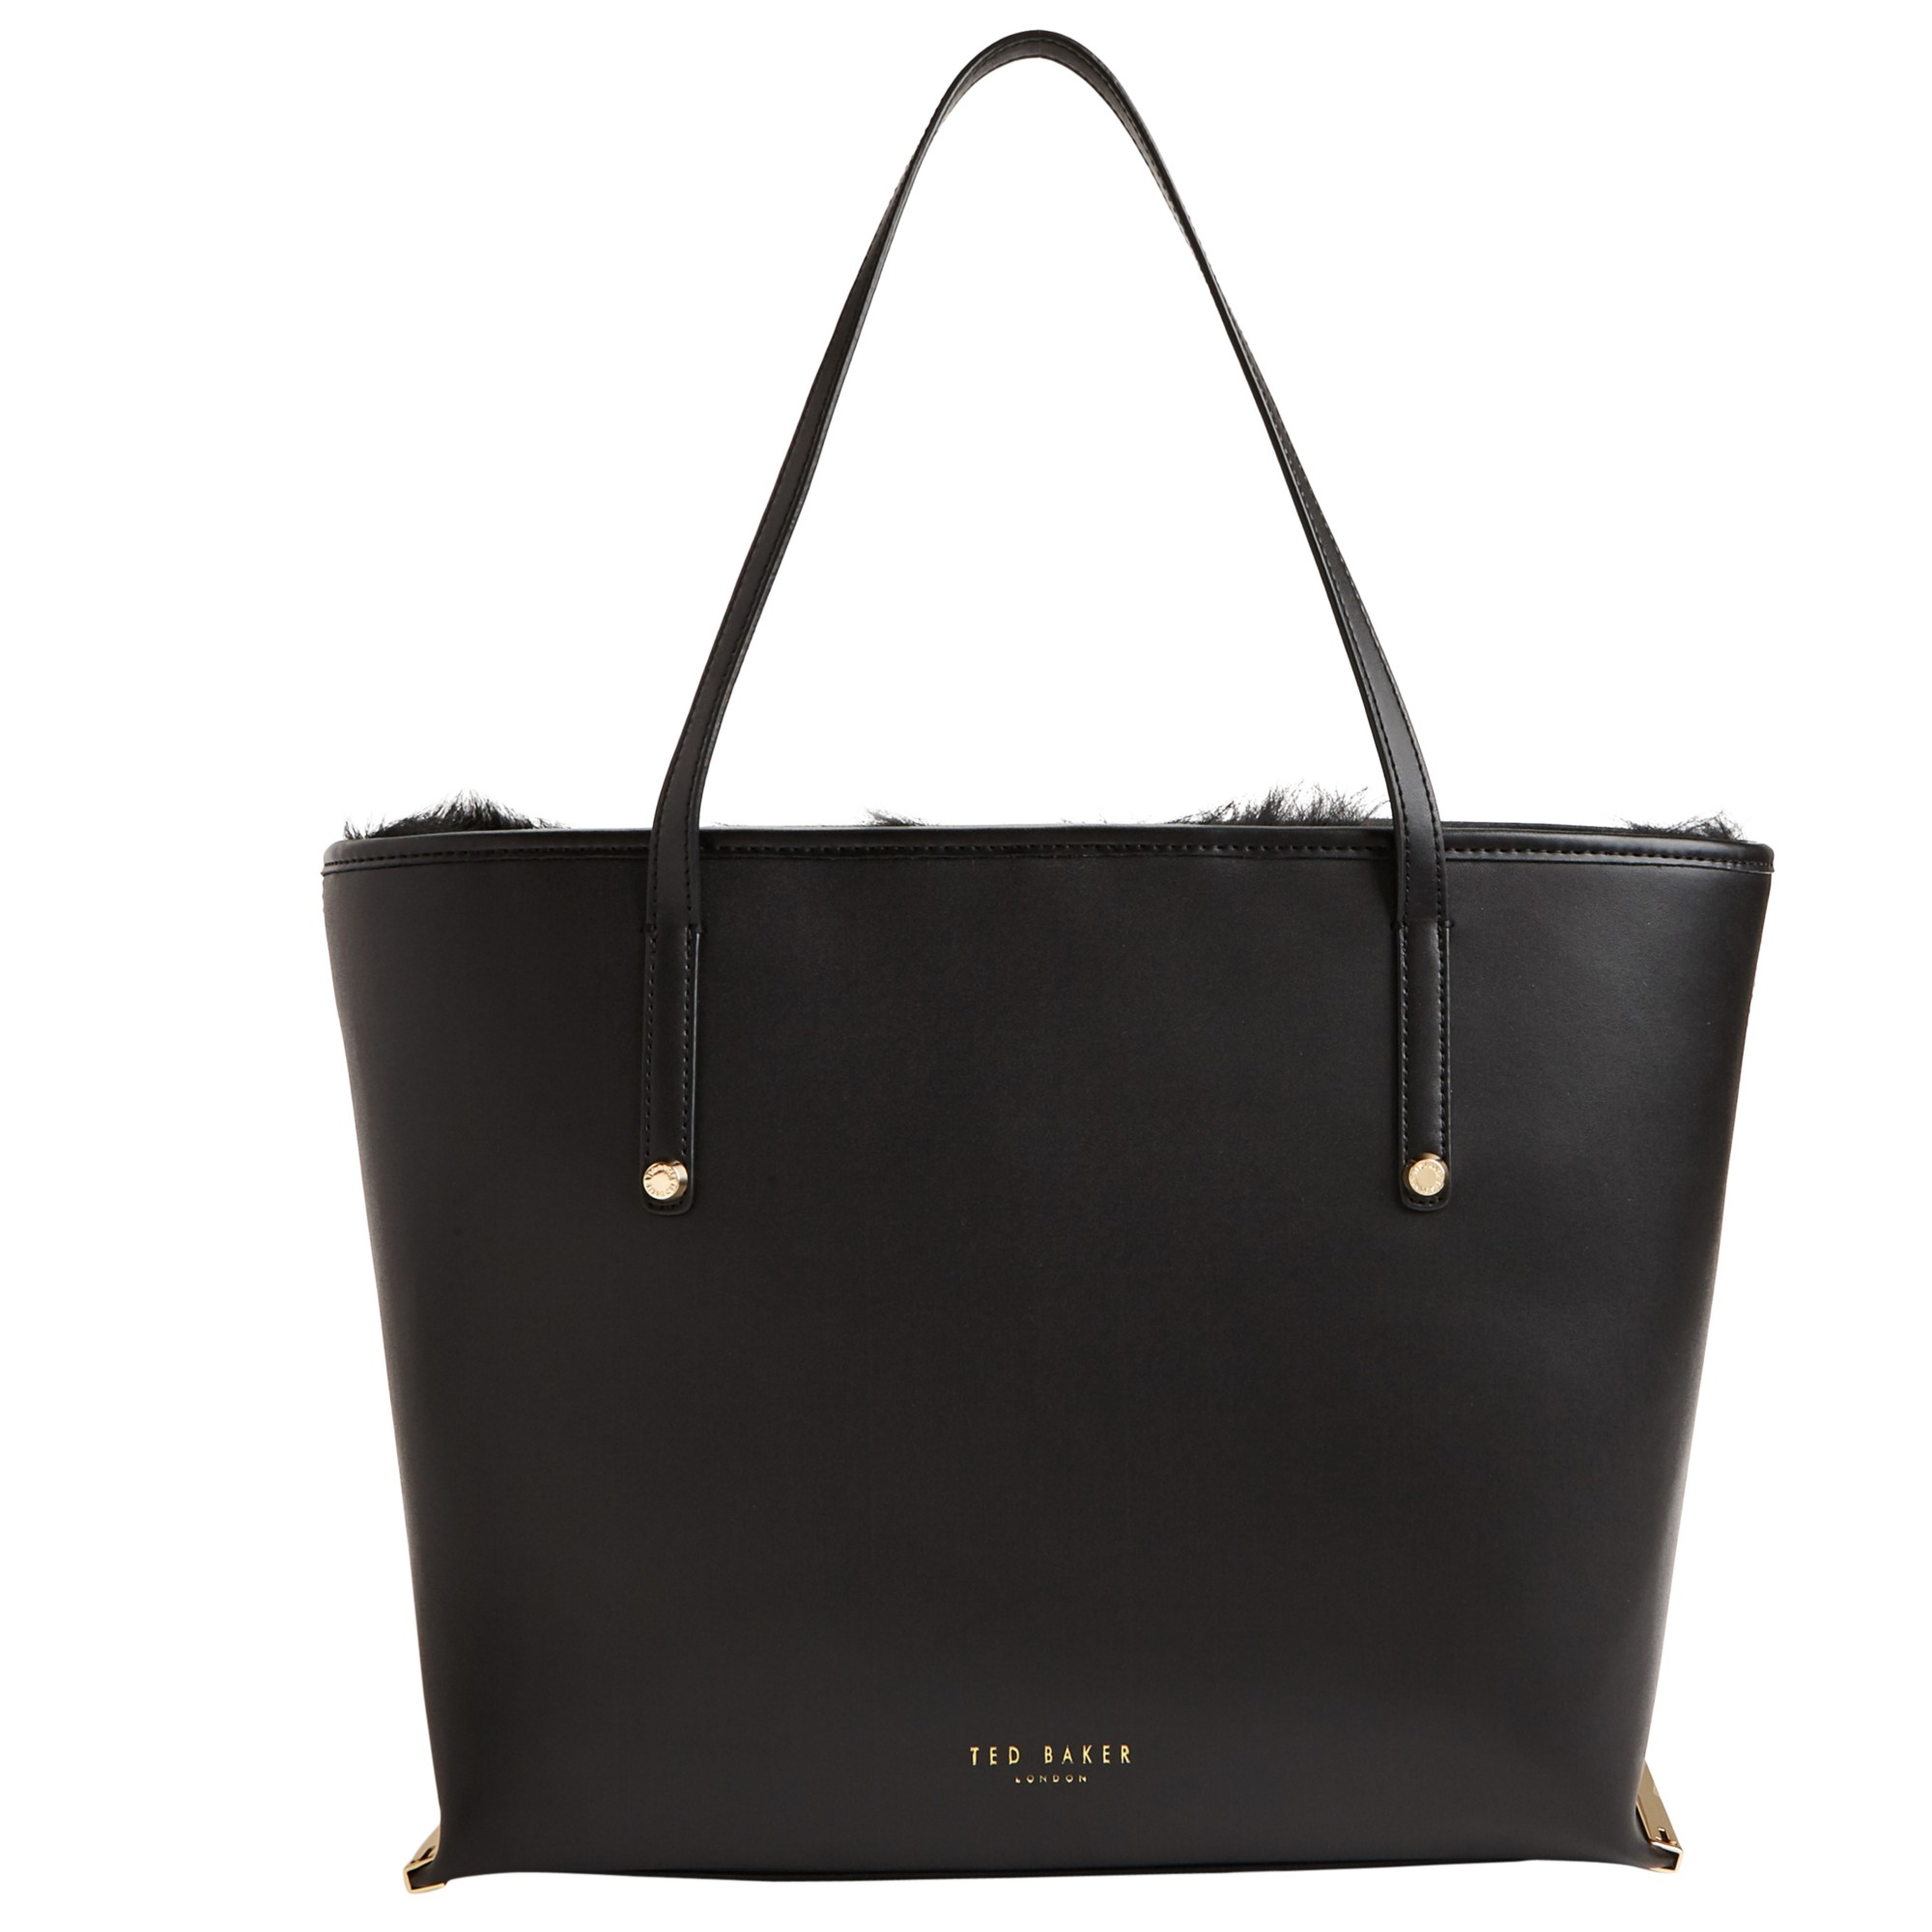 Ted baker Shearling Lined Large Leather Shopper Bag in Black | Lyst